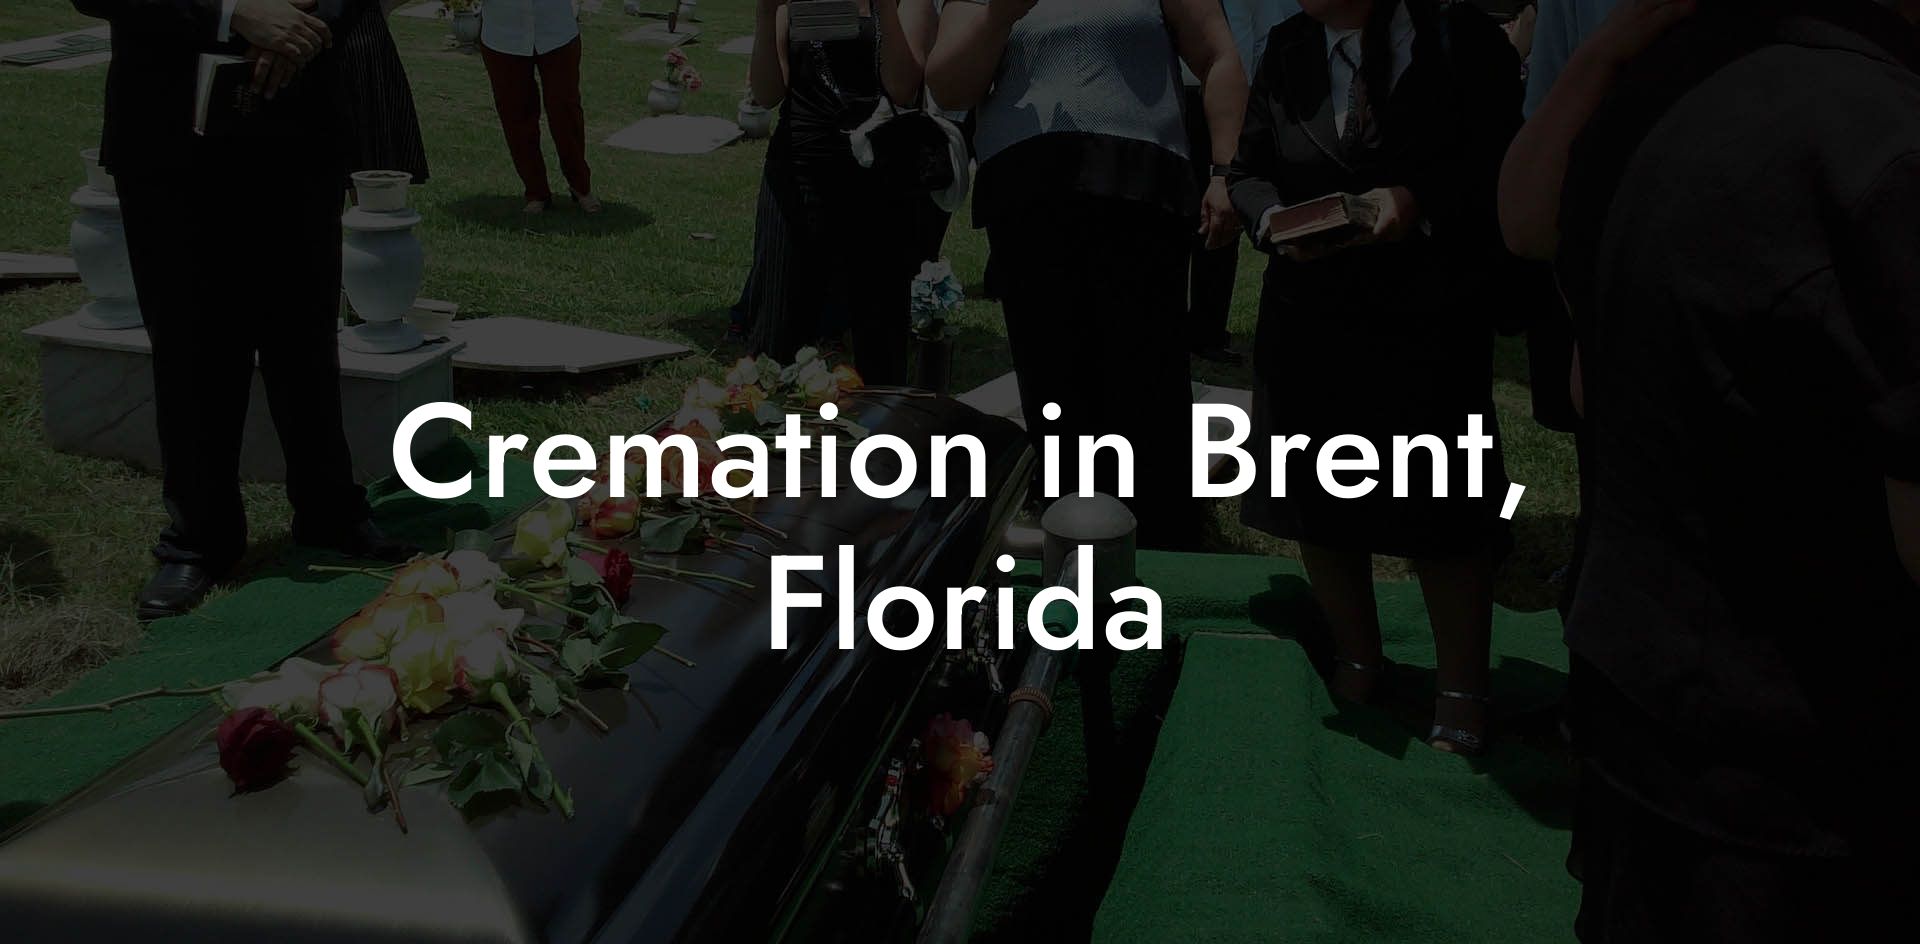 Cremation in Brent, Florida